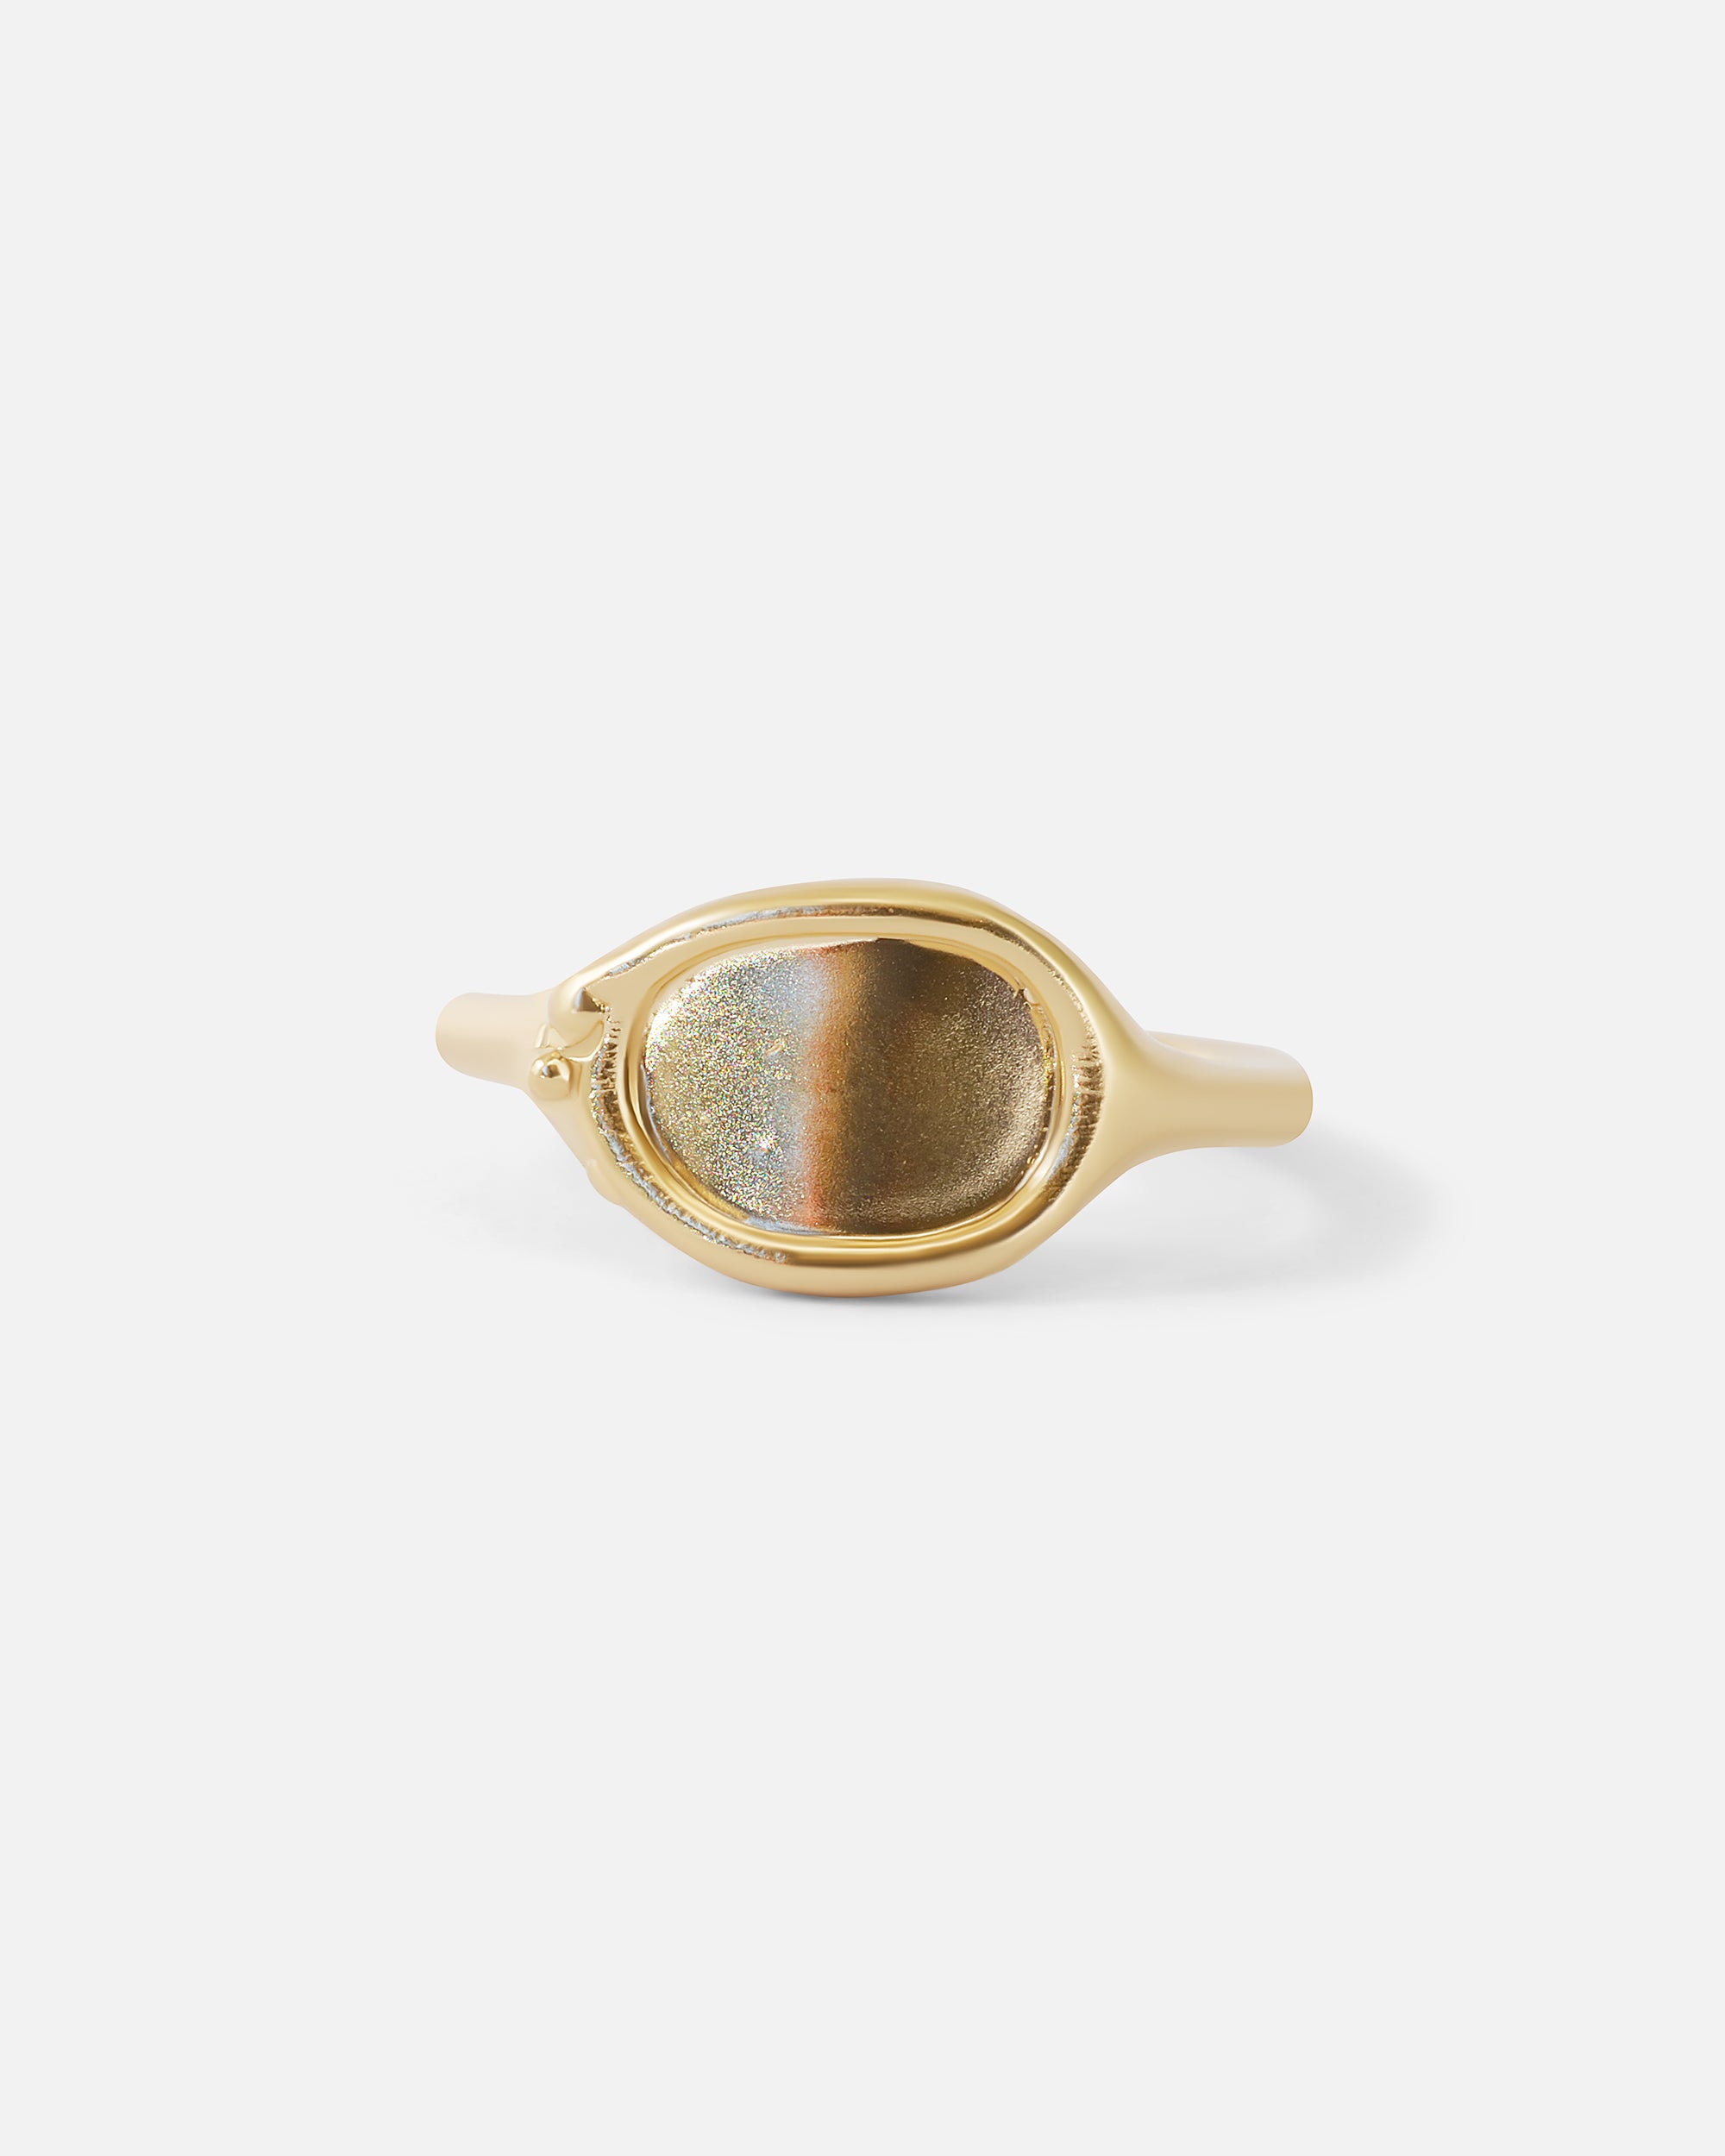 Reflection / III Ring By Alfonzo in rings Category